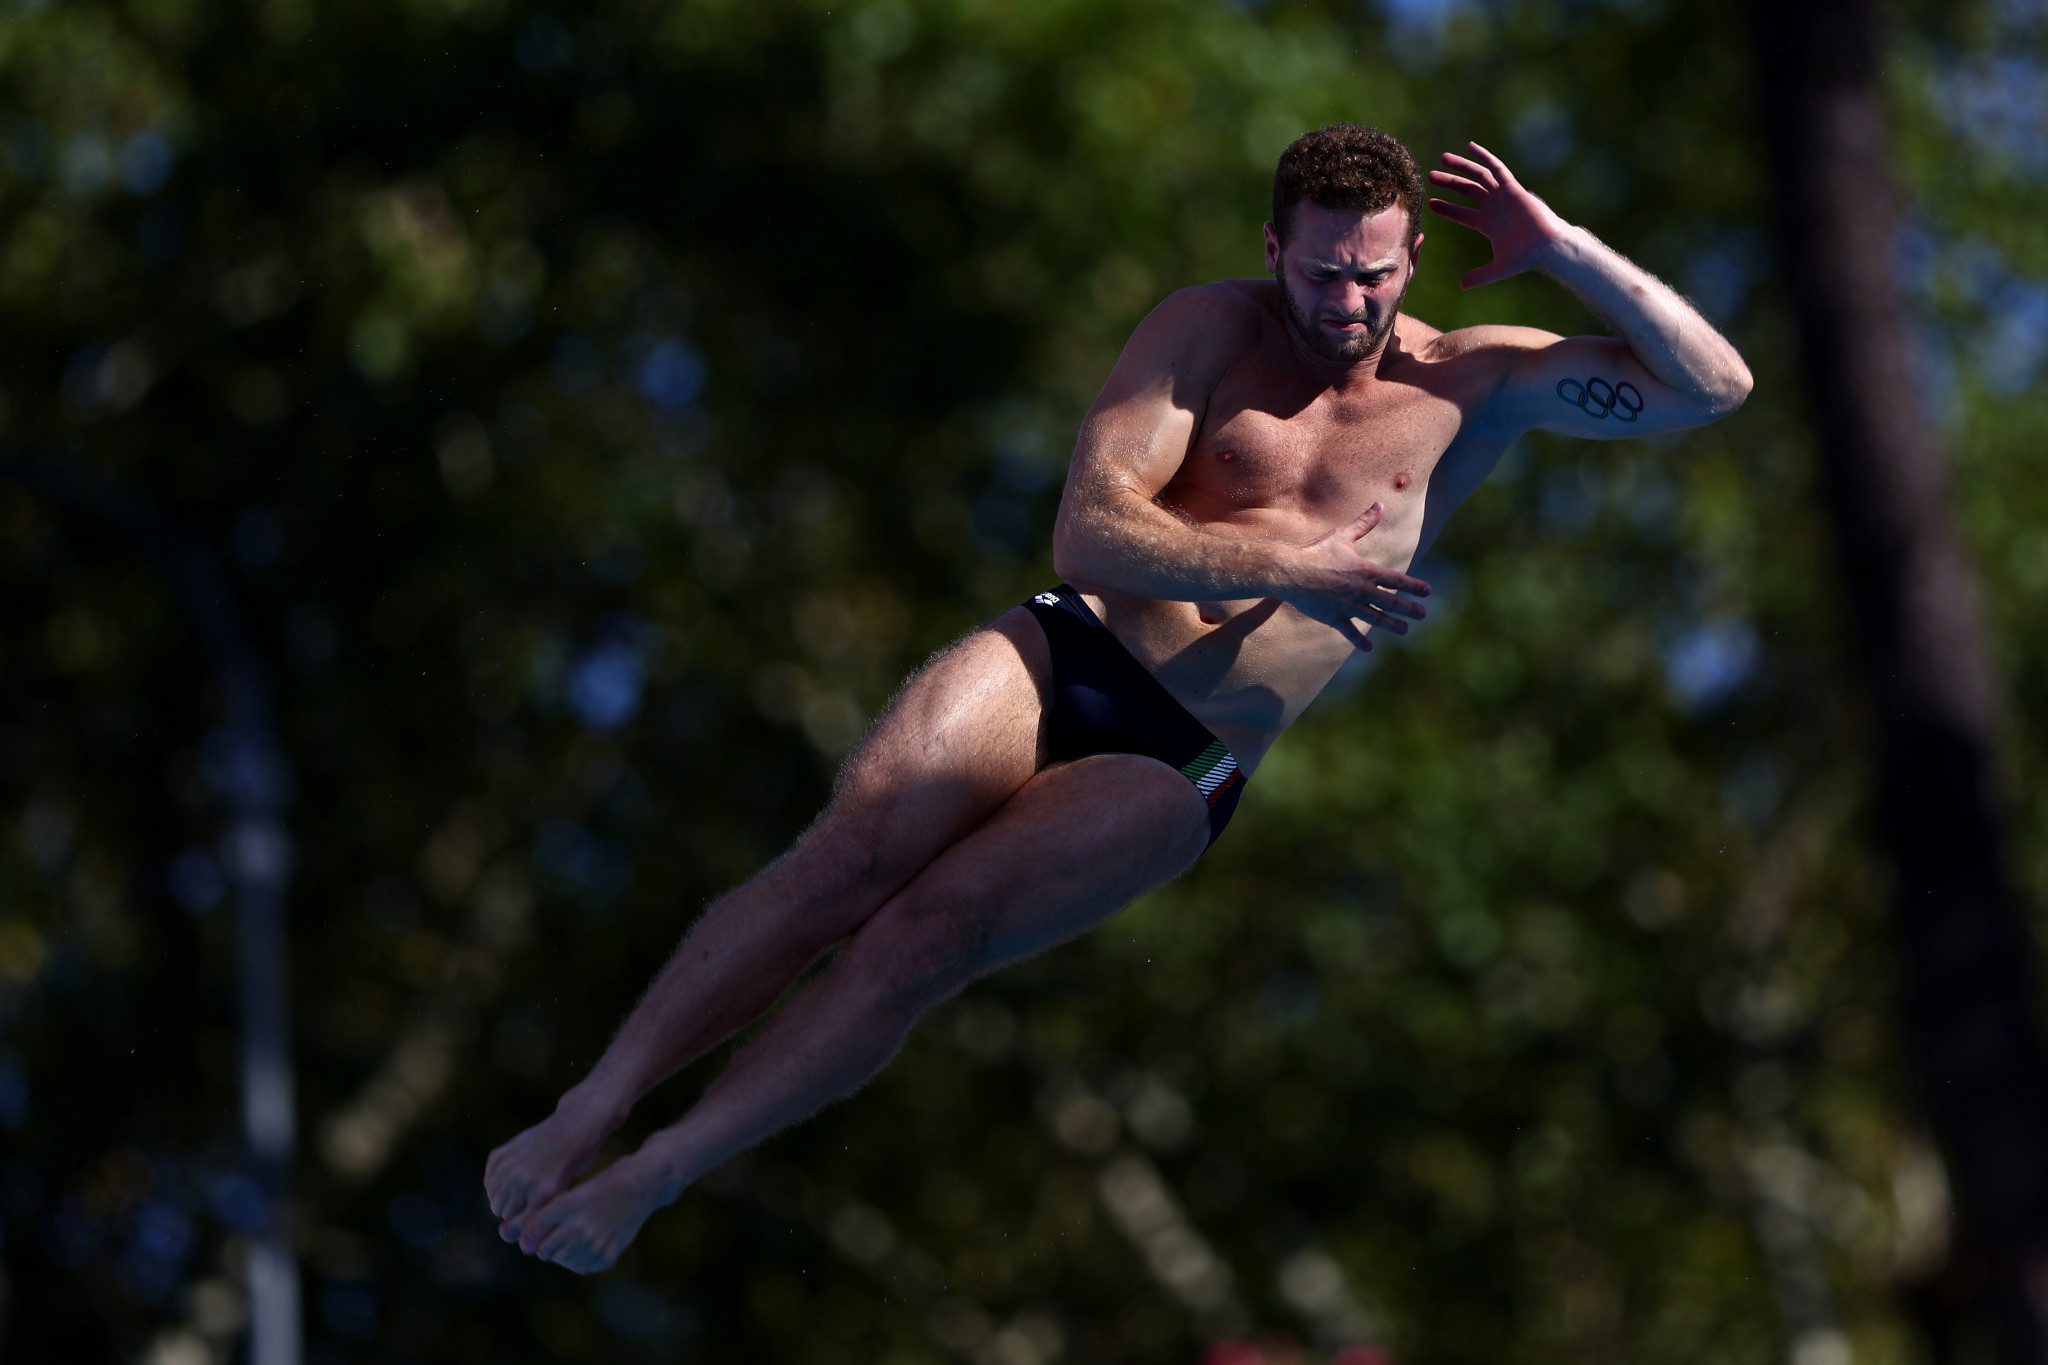 Lorenzo Marsaglia won the men's three metres springboard diving title on the penultimate day of the European Aquatics Championships ©Getty Images